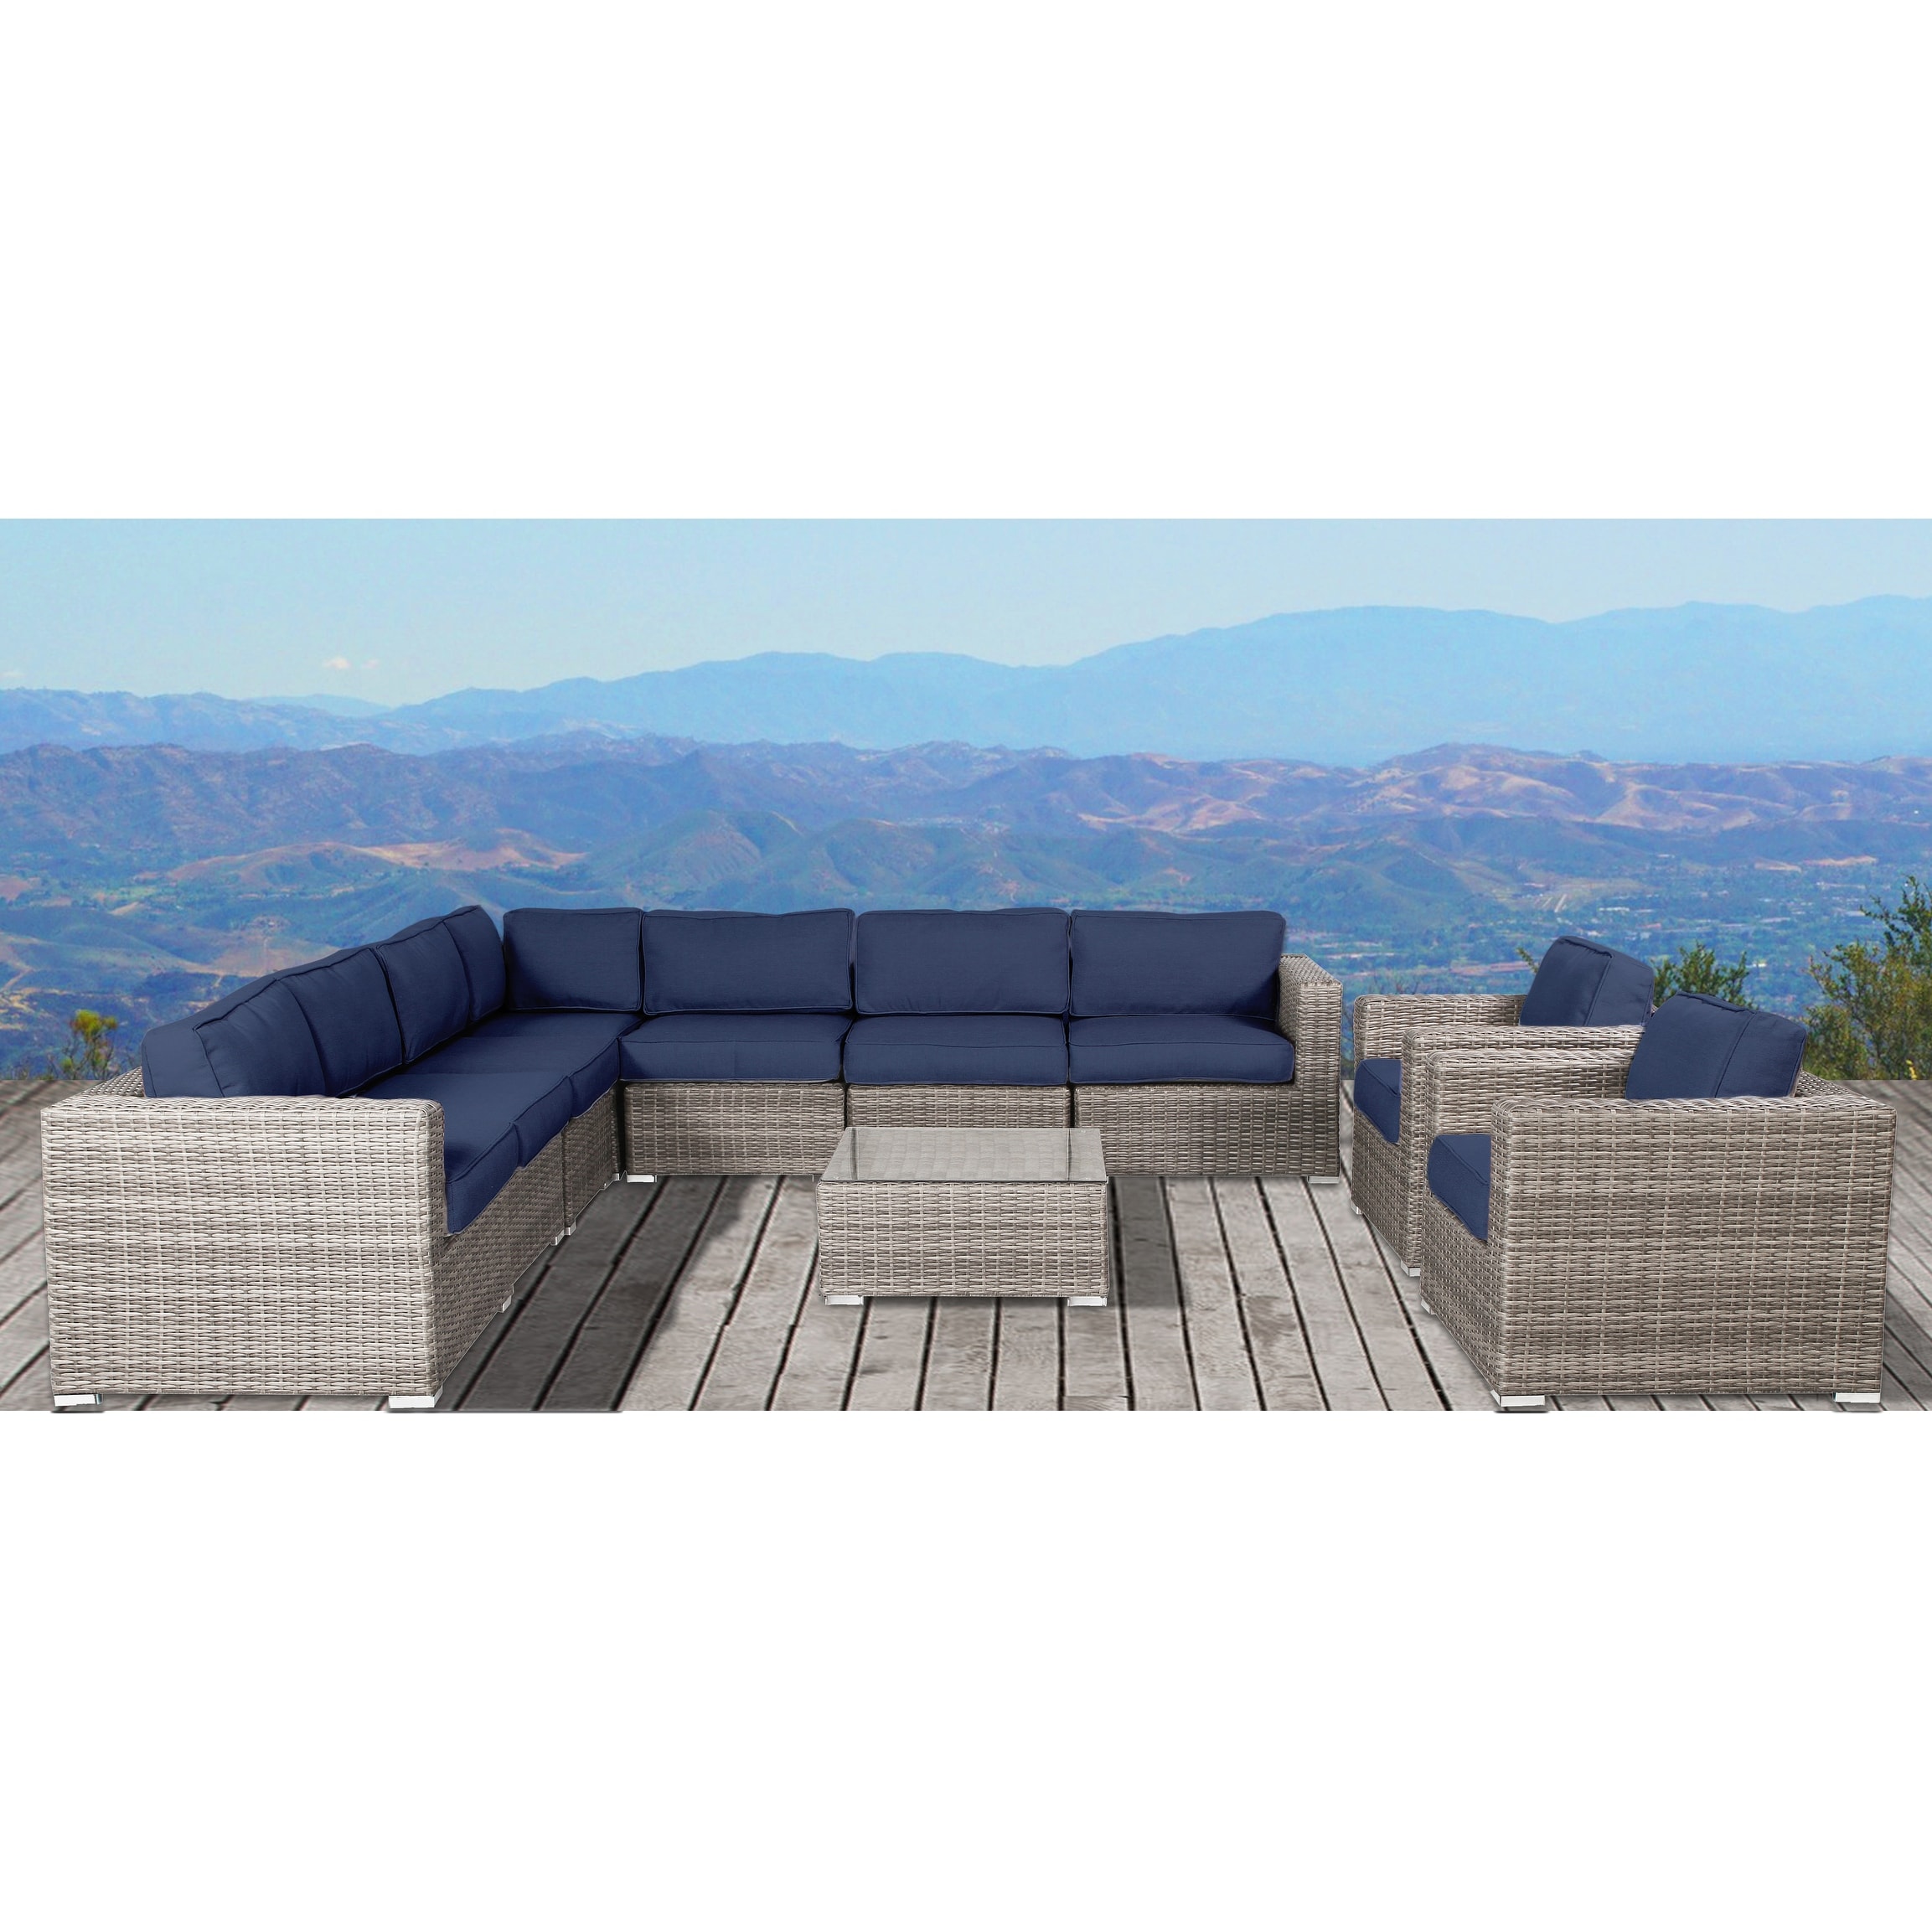 Lsi 10 Piece Sectional Seating Group